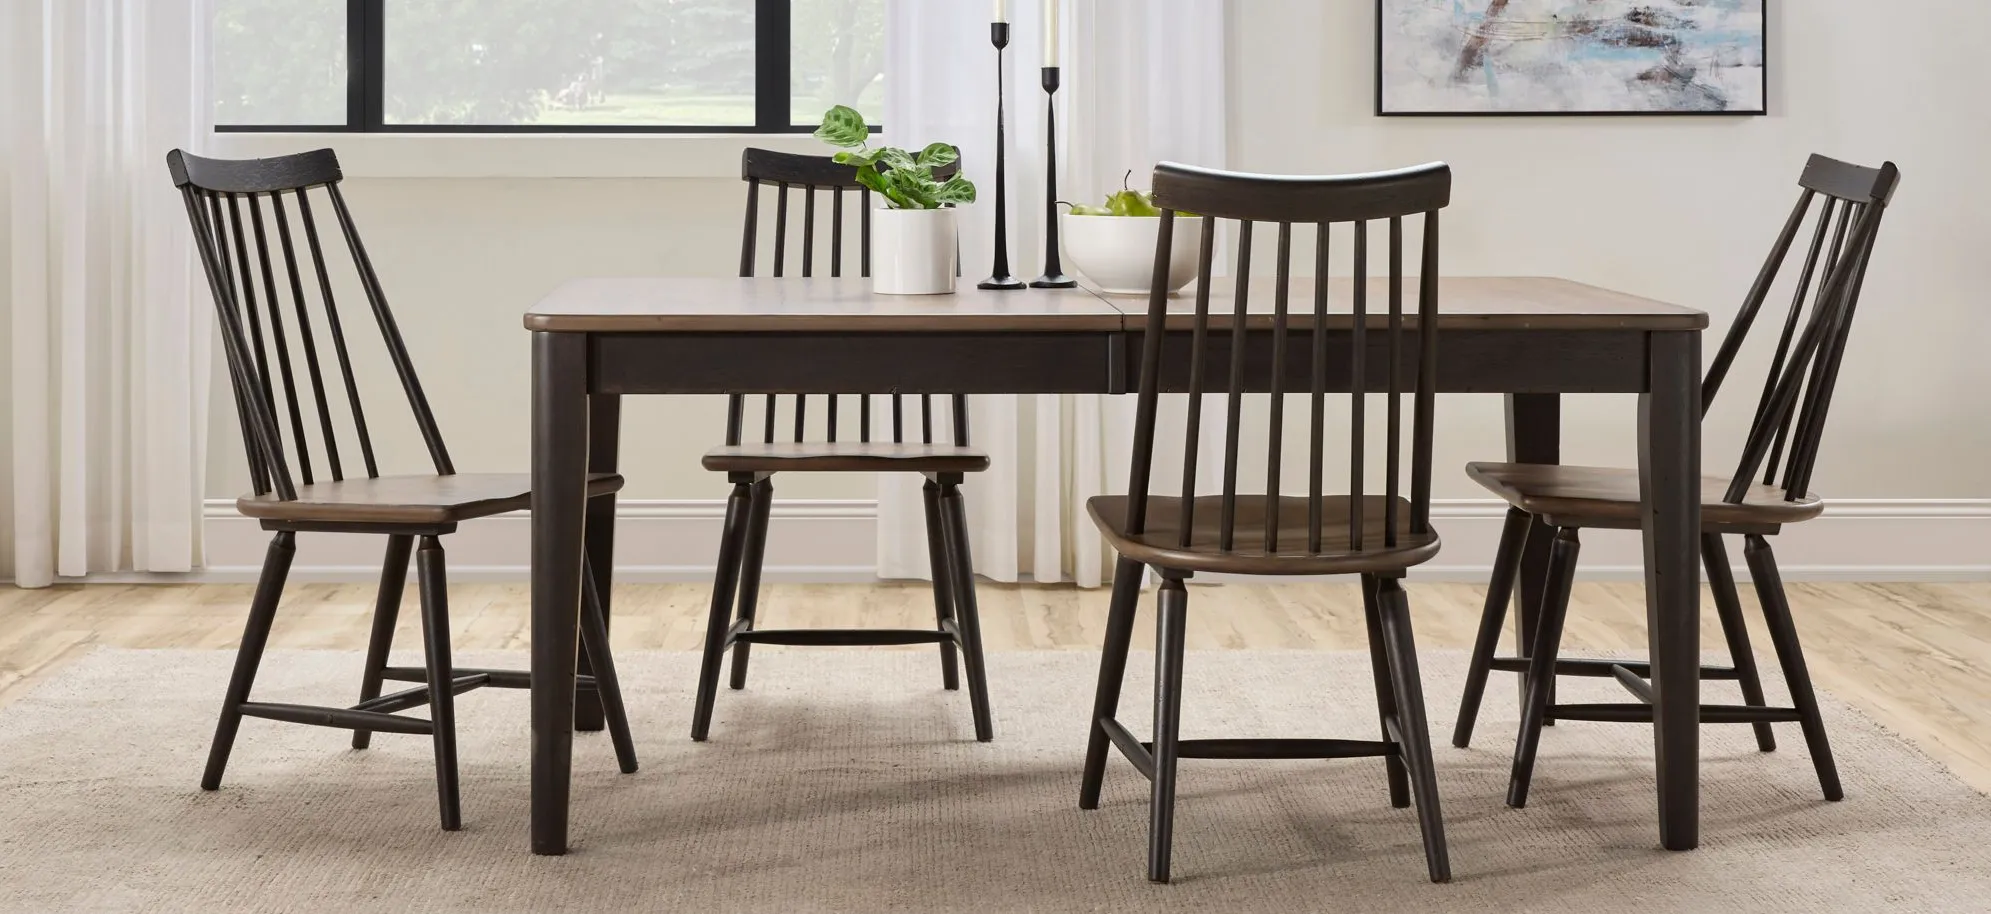 Highgrove 5-pc. Dining Set in Black and Woodtone by Liberty Furniture